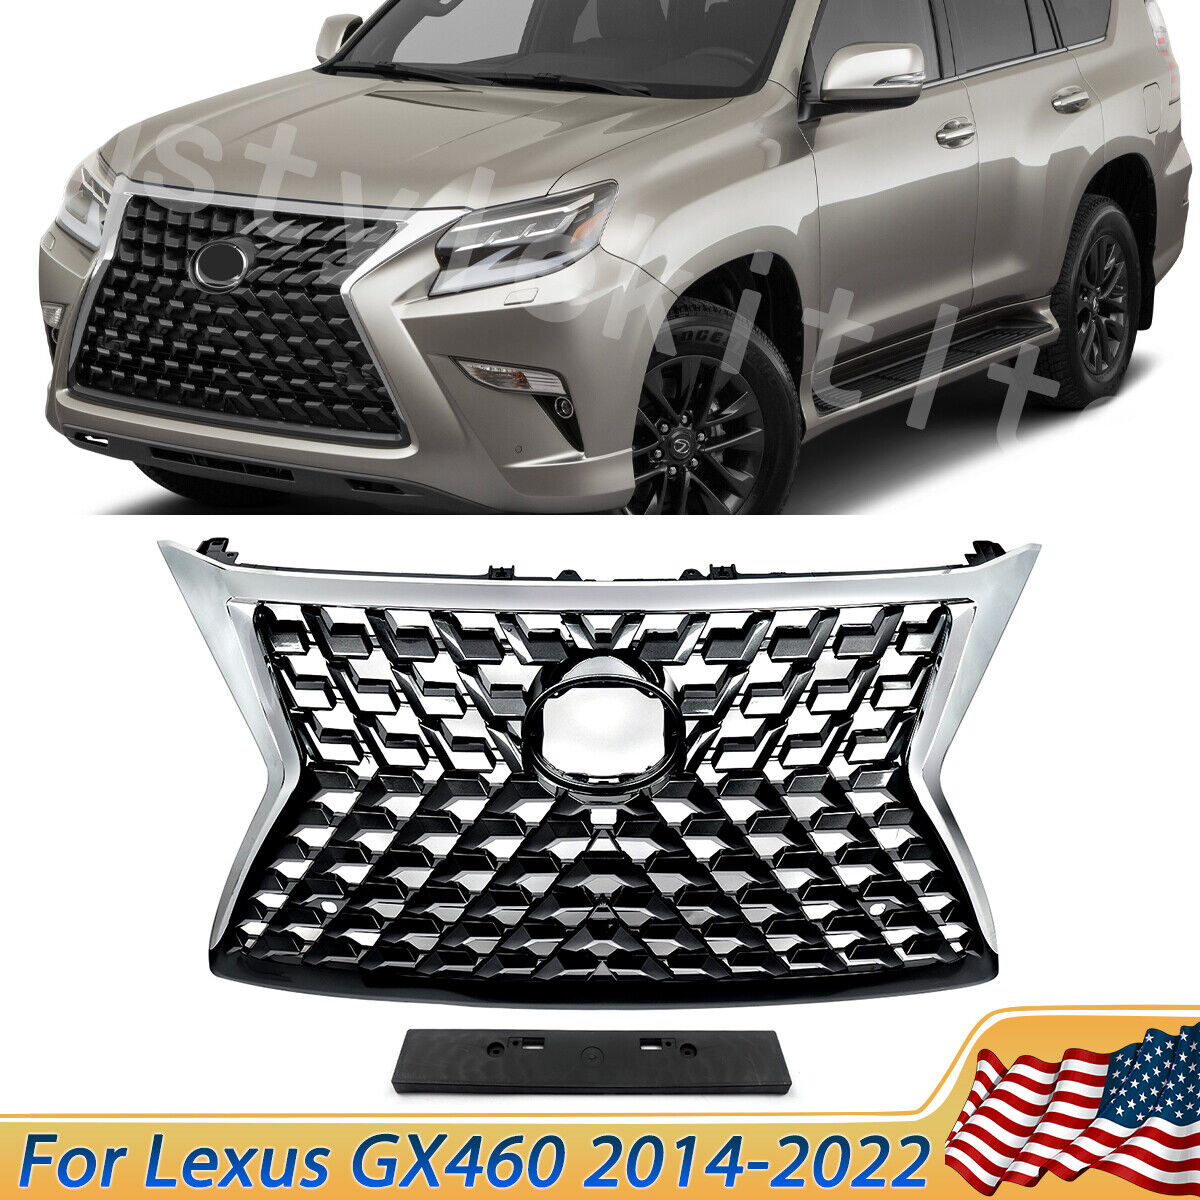 NEW UPGRADE LUXURY GRILL For 2014-2022 LEXUS GX460 Front Upper Grille USA